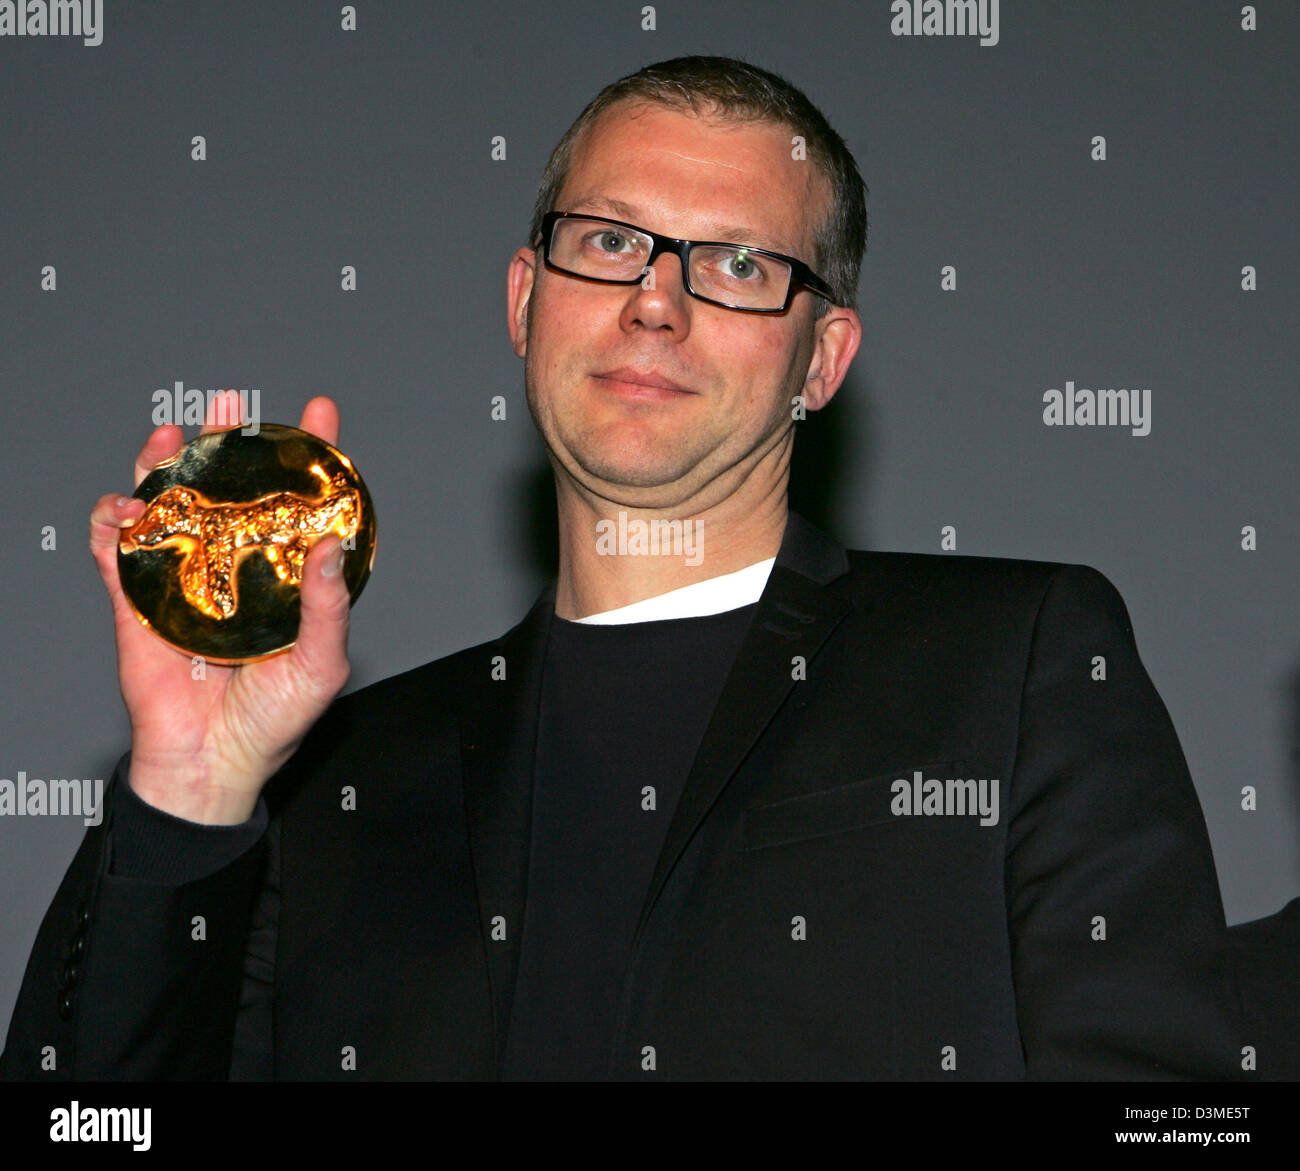 Swedish director Jonas Odell proudly presents his 'Golden Bear' Award at the 56th International Film Festival in Berlin, Monday, 13 February 2006. Odell received the award for his animation film 'Aldrig som foersta gaengen!' (Never again like the first time!) in the category 'Best Short Film'. Photo: Jens Kalaene Stock Photo